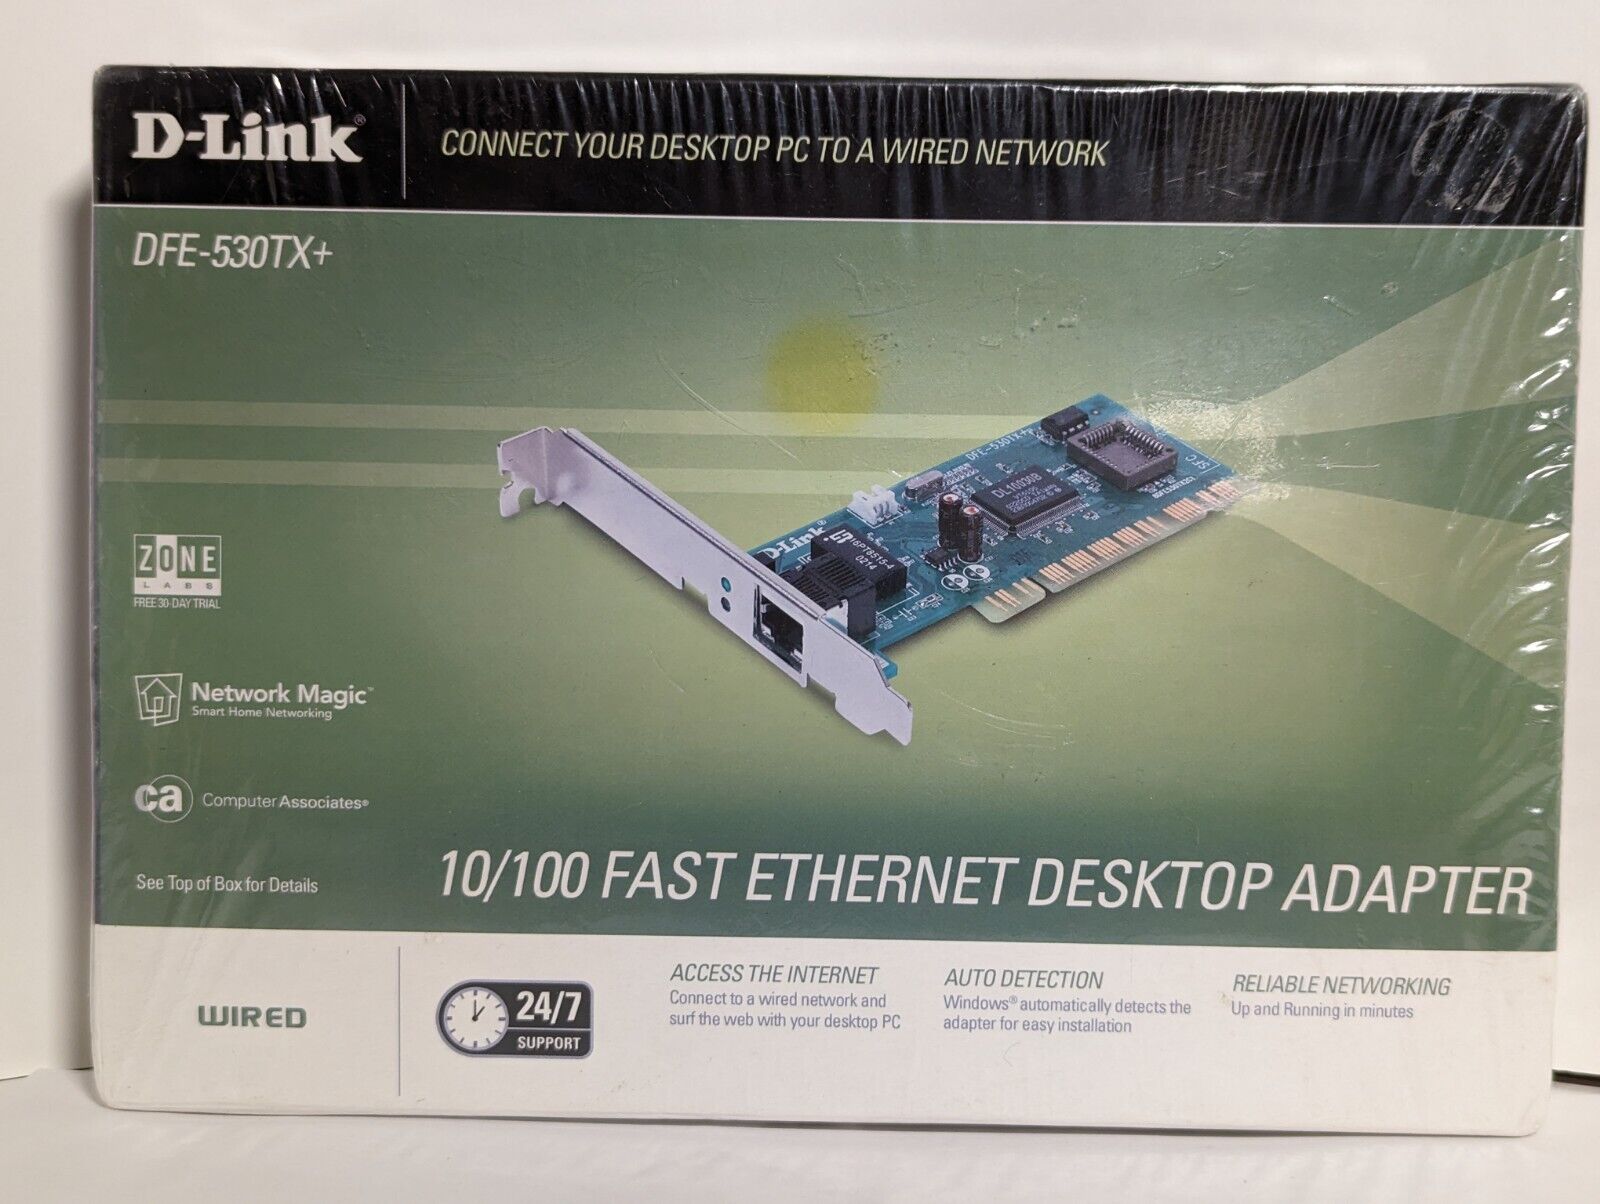 NEW D-Link Express EtherNetwork 10/100Mbps Fast Ethernet PCI Adapter DFE-530TX+